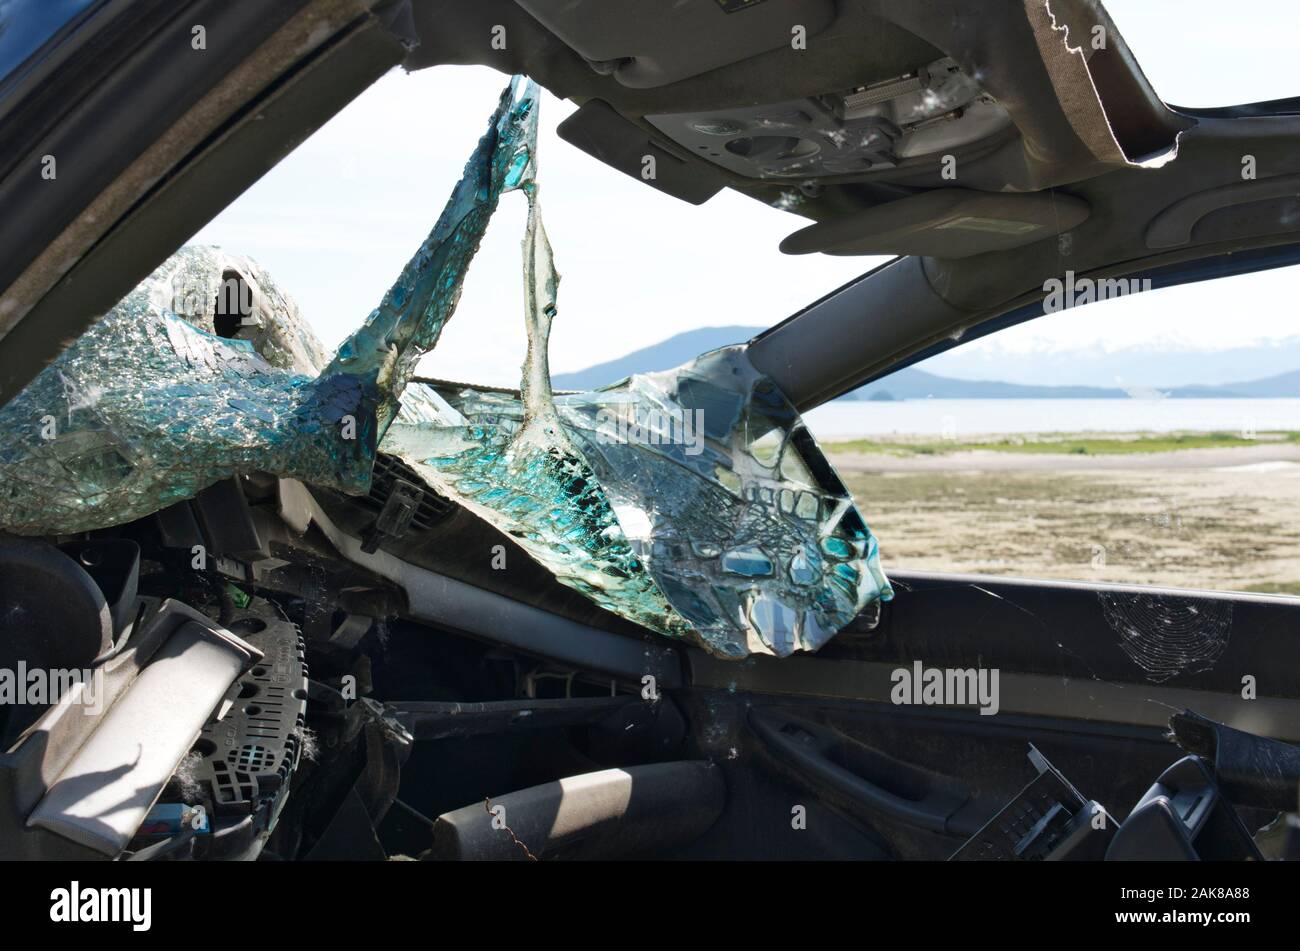 Aftermath of a car accident with a smashed windshield and bent vehicle frame as shown from the interior. Stock Photo